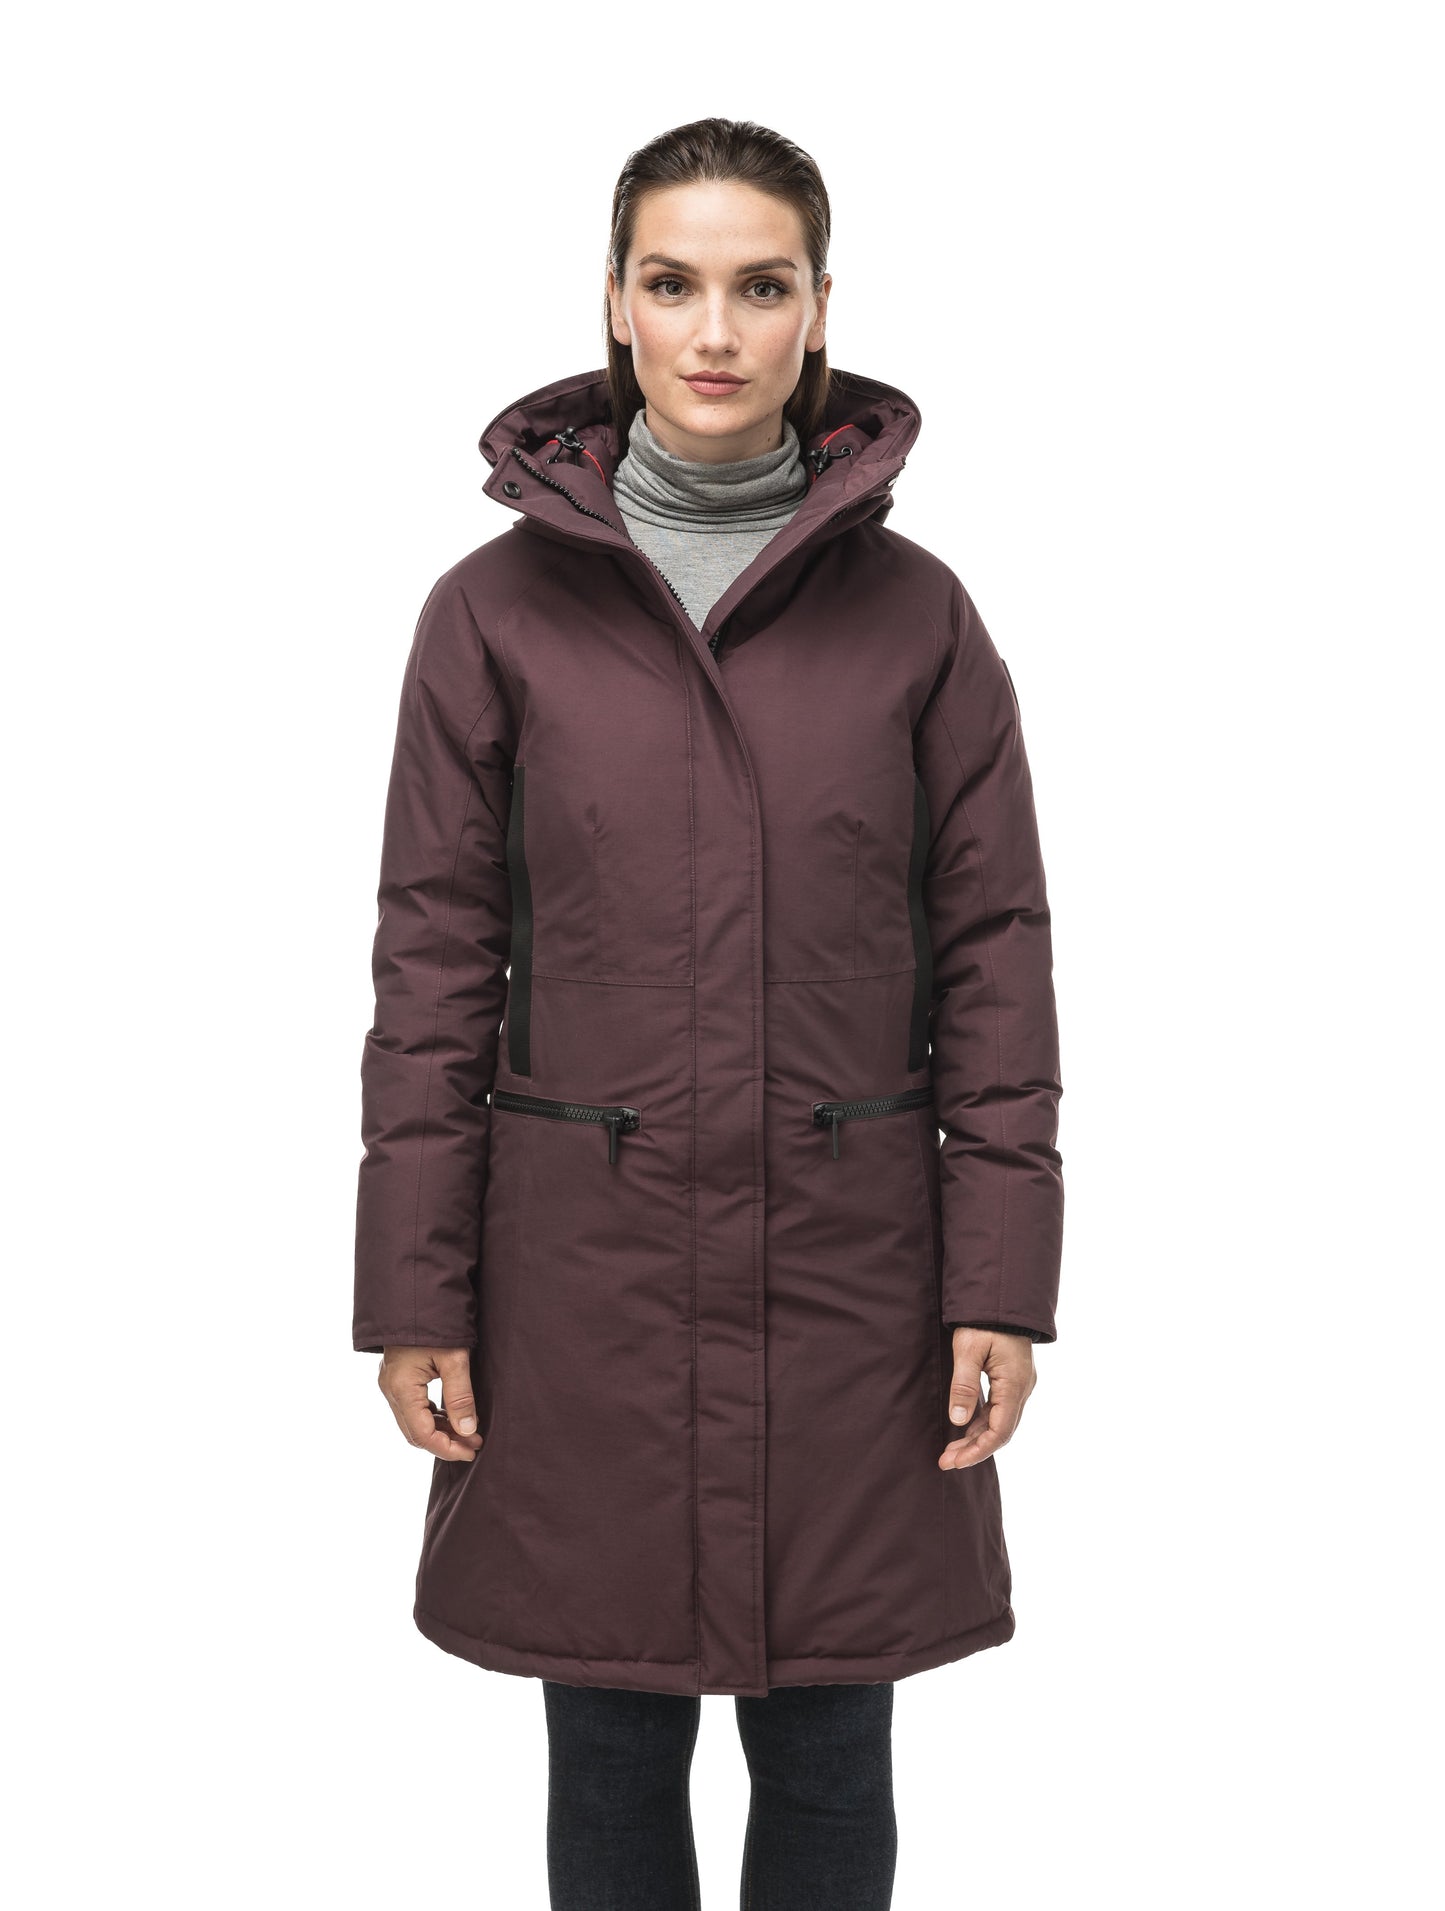 Knee length women's down filled parka with contrast ribbon accents and removable fur trim on the hood in Burgundy